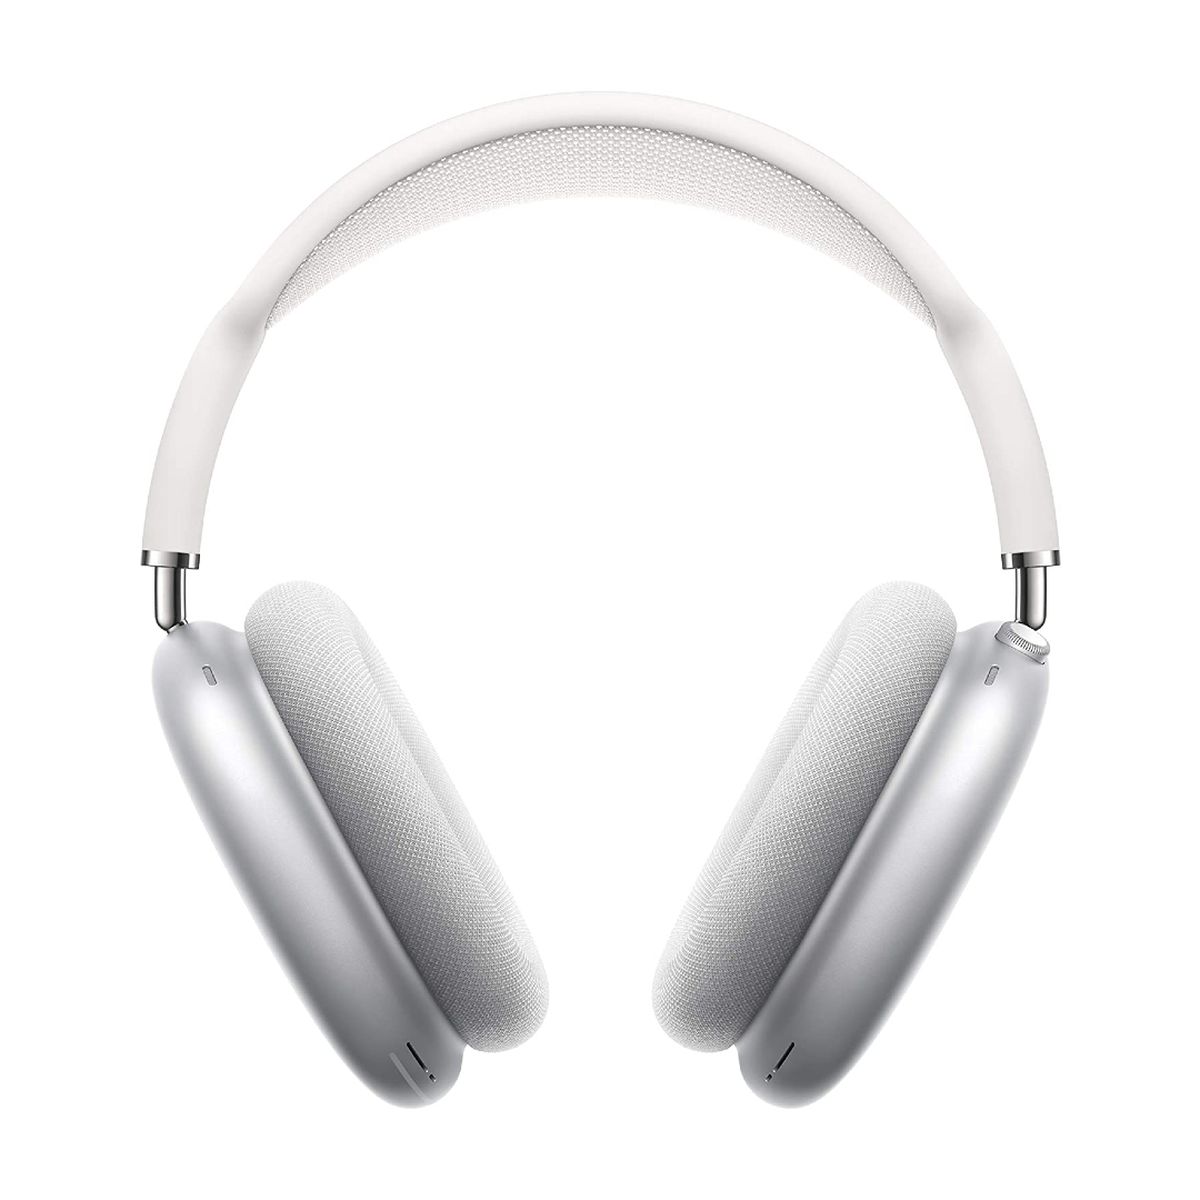 The best noise-canceling headphones to buy right now